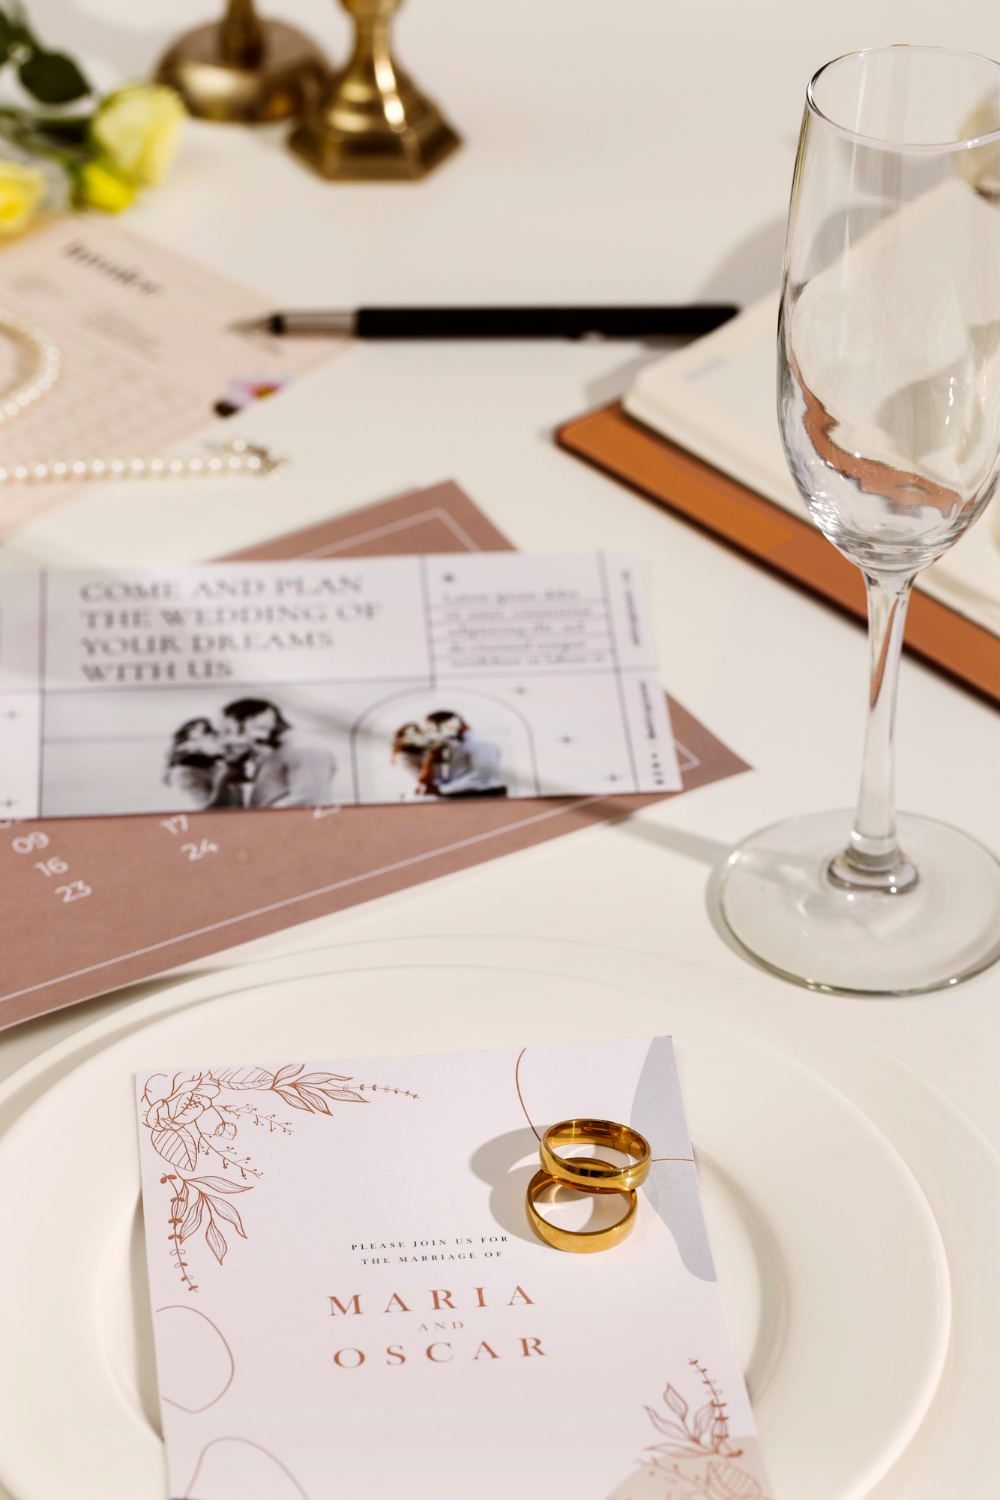 photo view of elegant and luxurious wedding stationery and planner resources